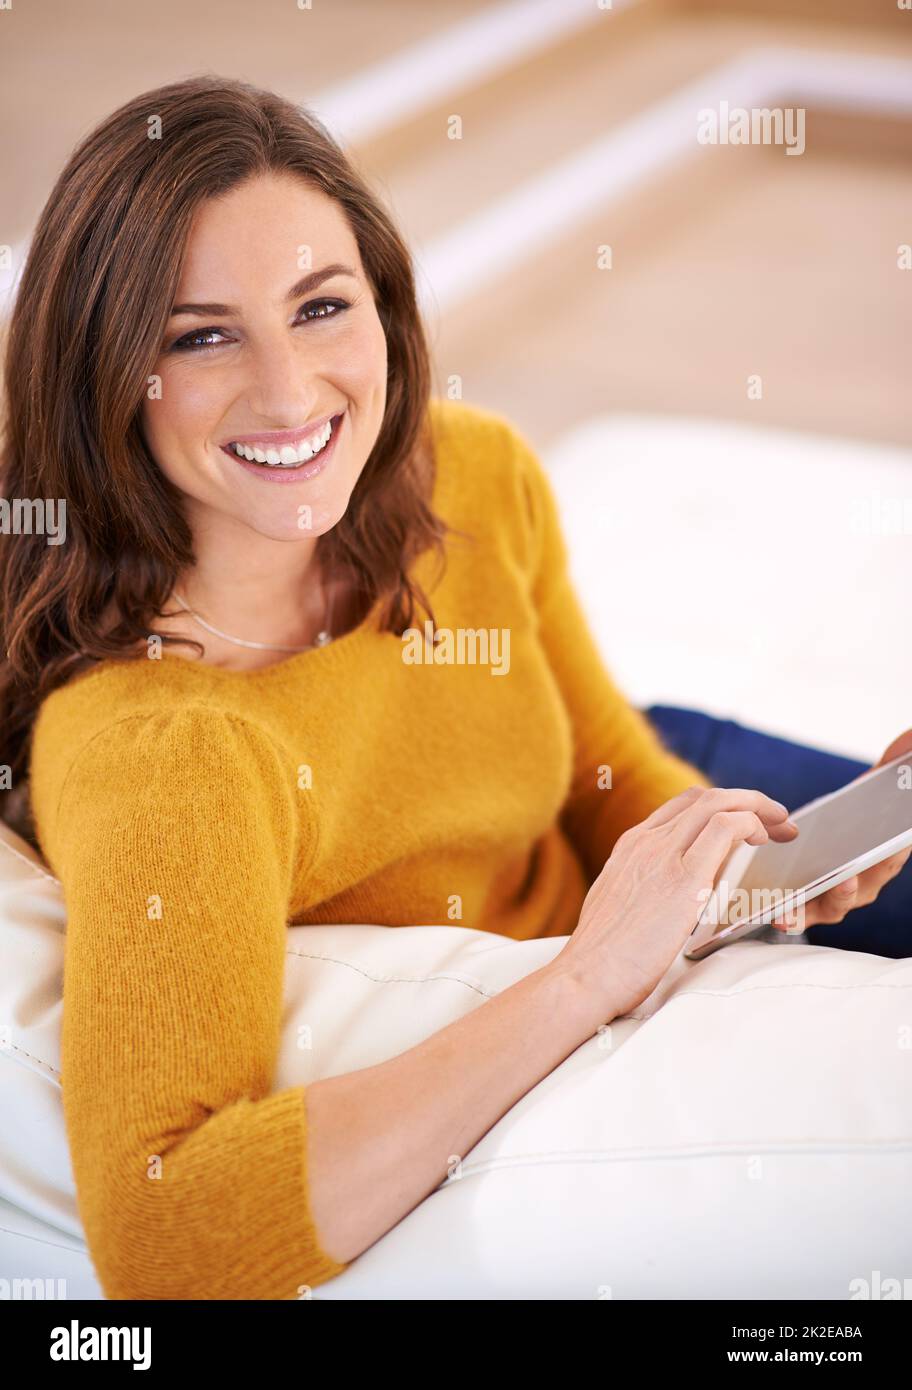 Getting into a good book on her digital tablet. Shot of a gorgeous young woman using a digital tablet indoors. Stock Photo